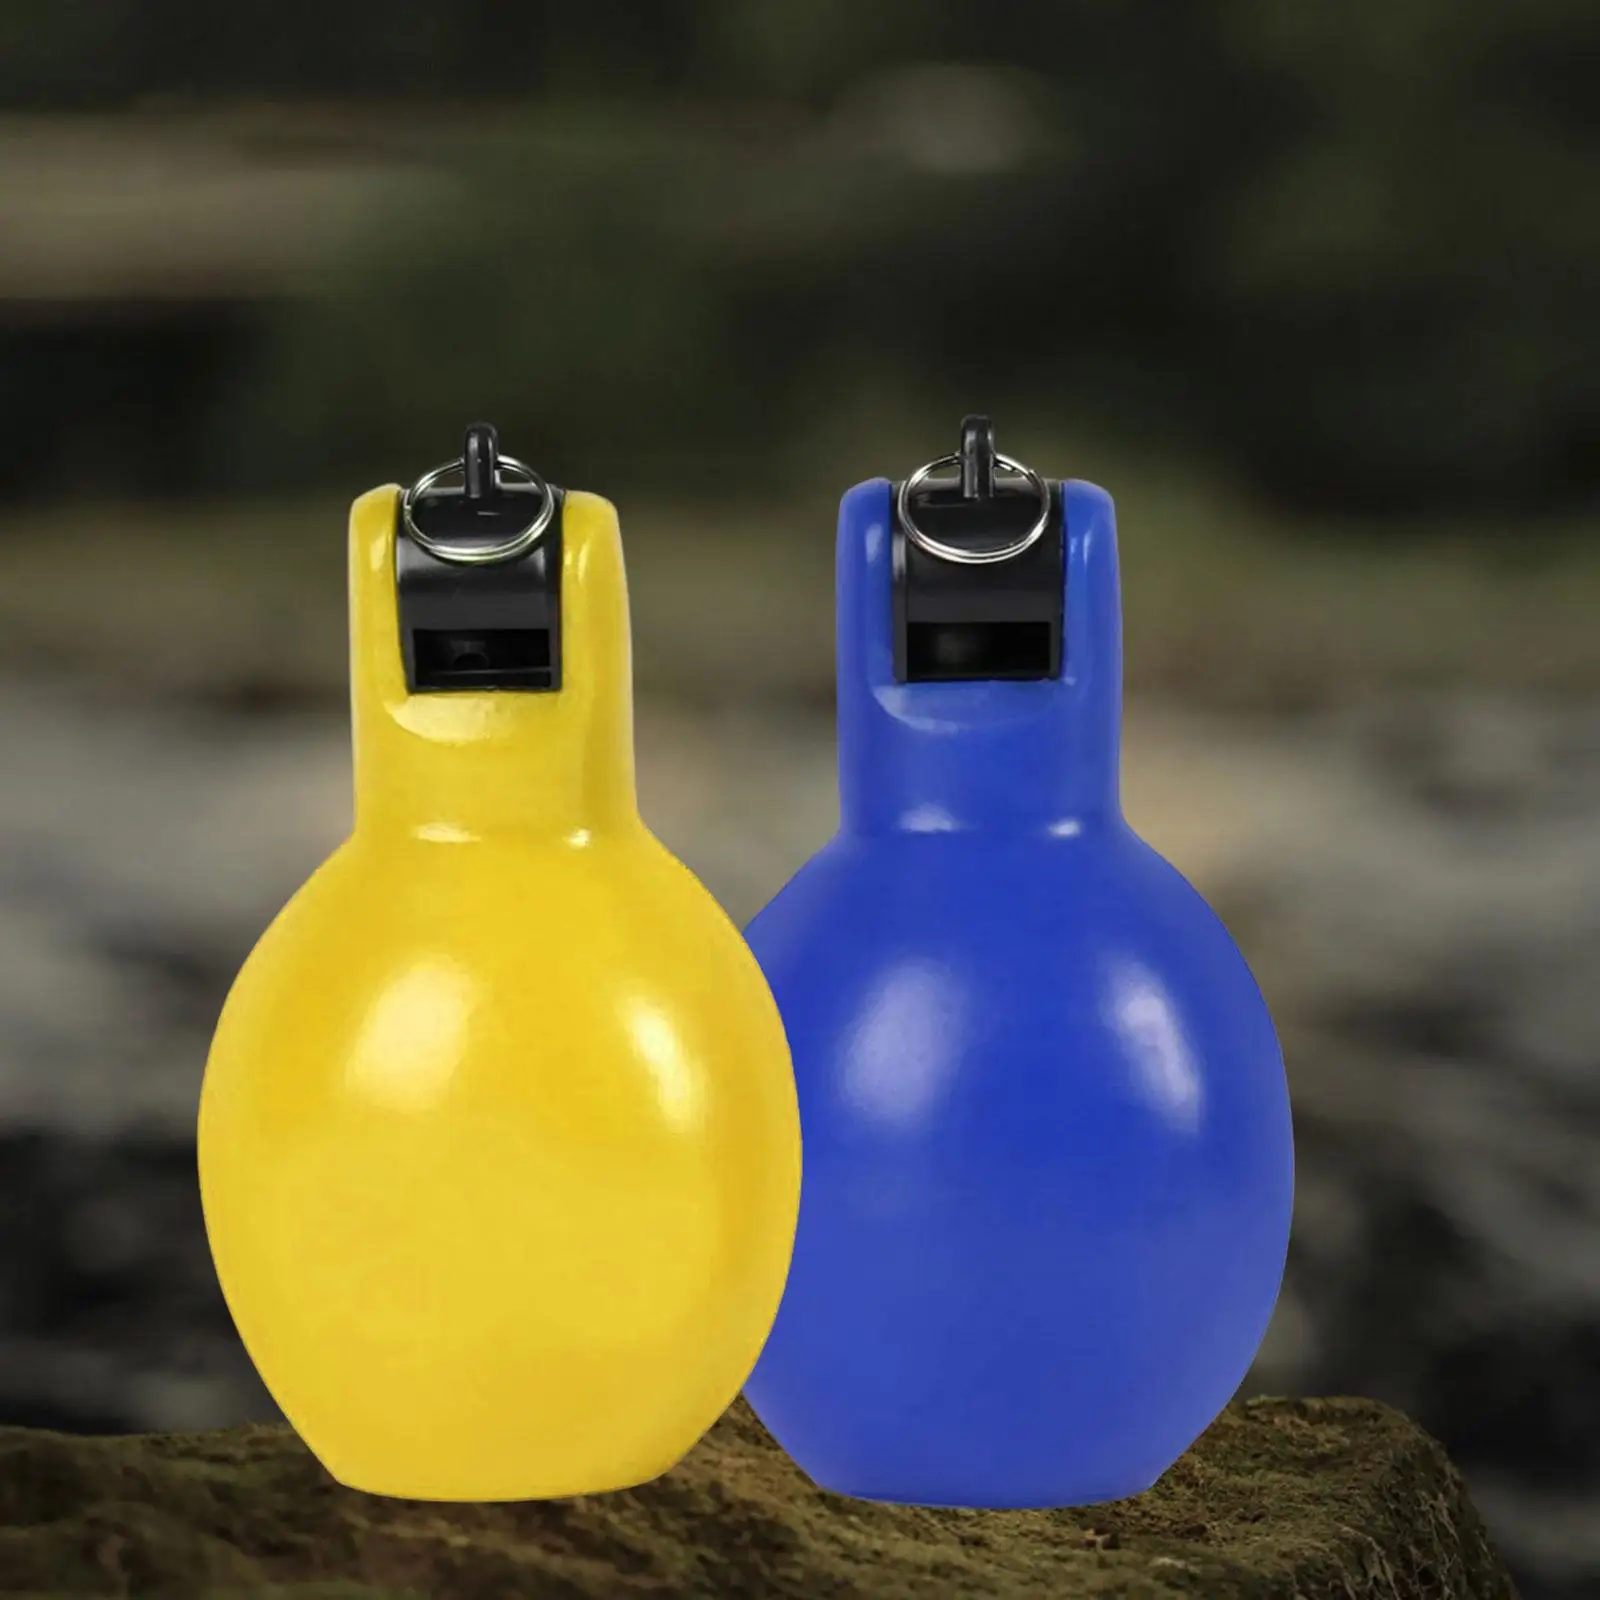 2Pcs Hand Squeeze Whistles Lightweight Soft Loud Manual Coaches Whistle for Walking Home School Football Hiking Referees